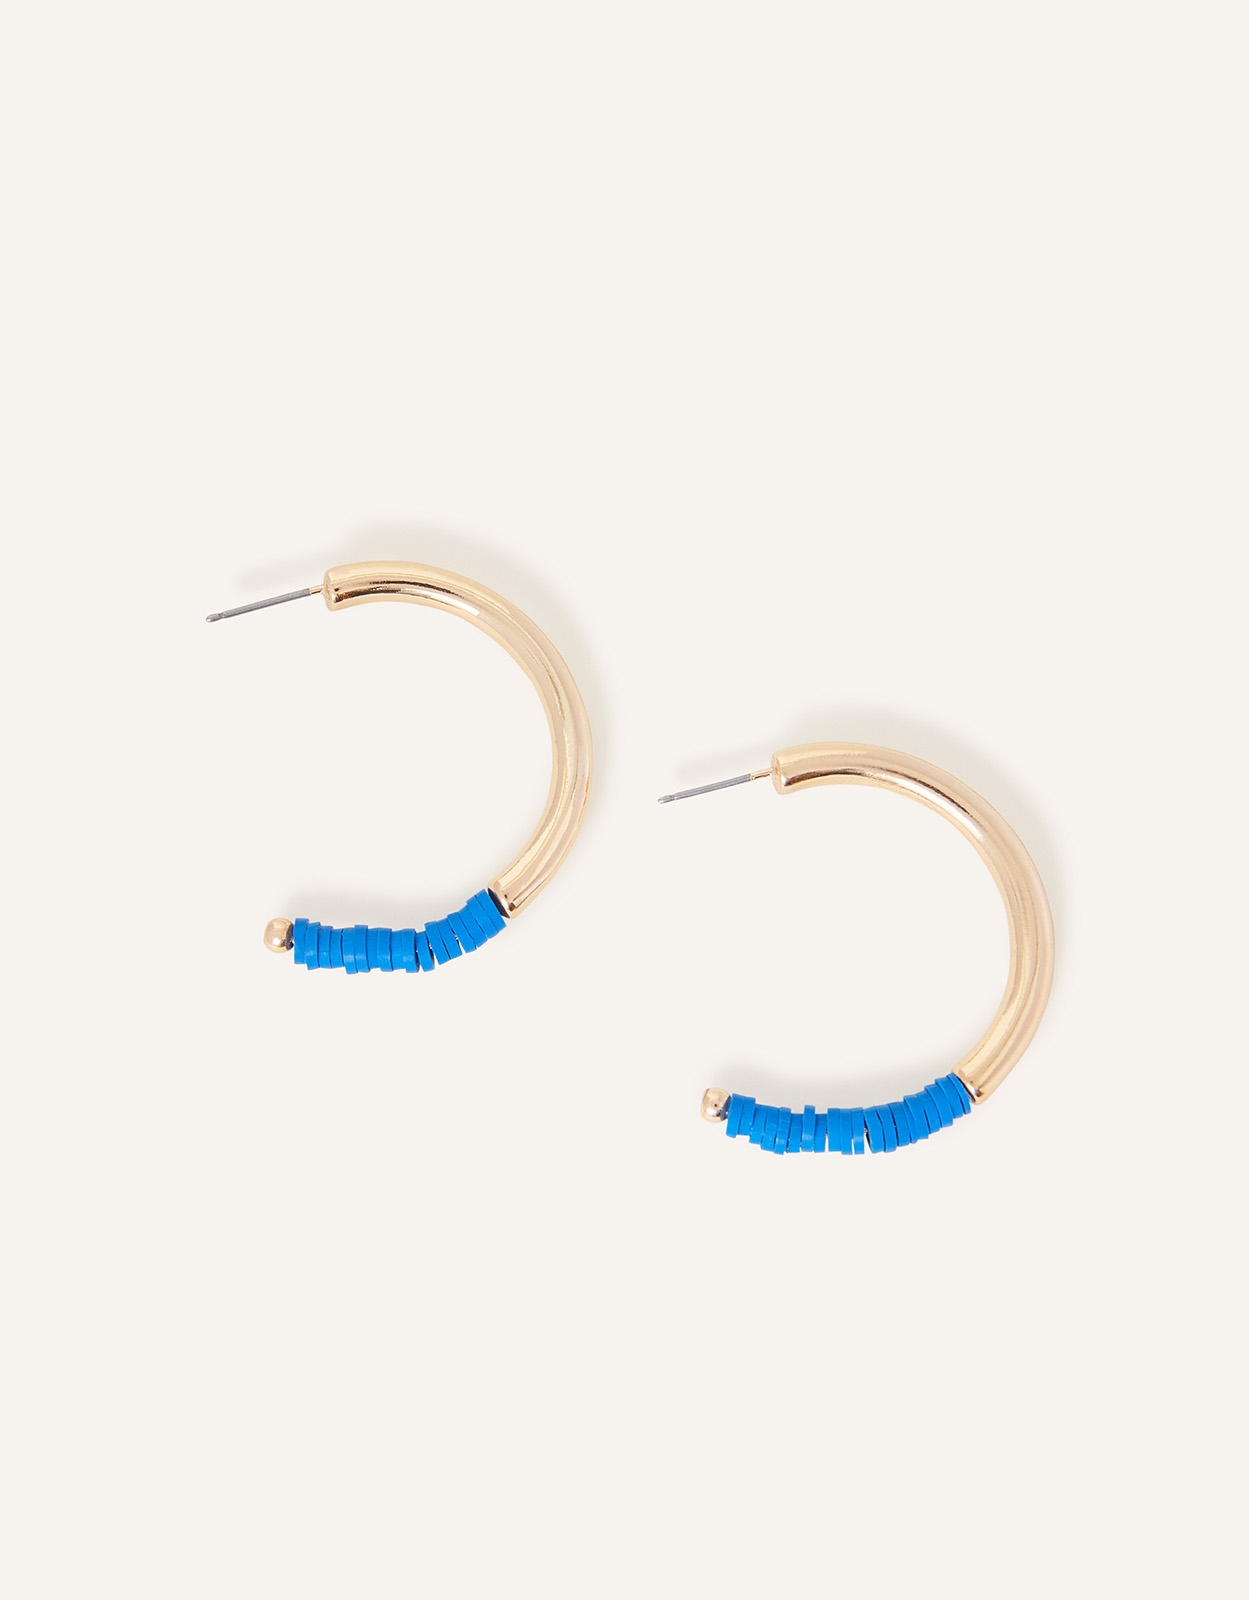 Accessorize Women's Gold and Blue Beaded Hoops, Size: 4cm